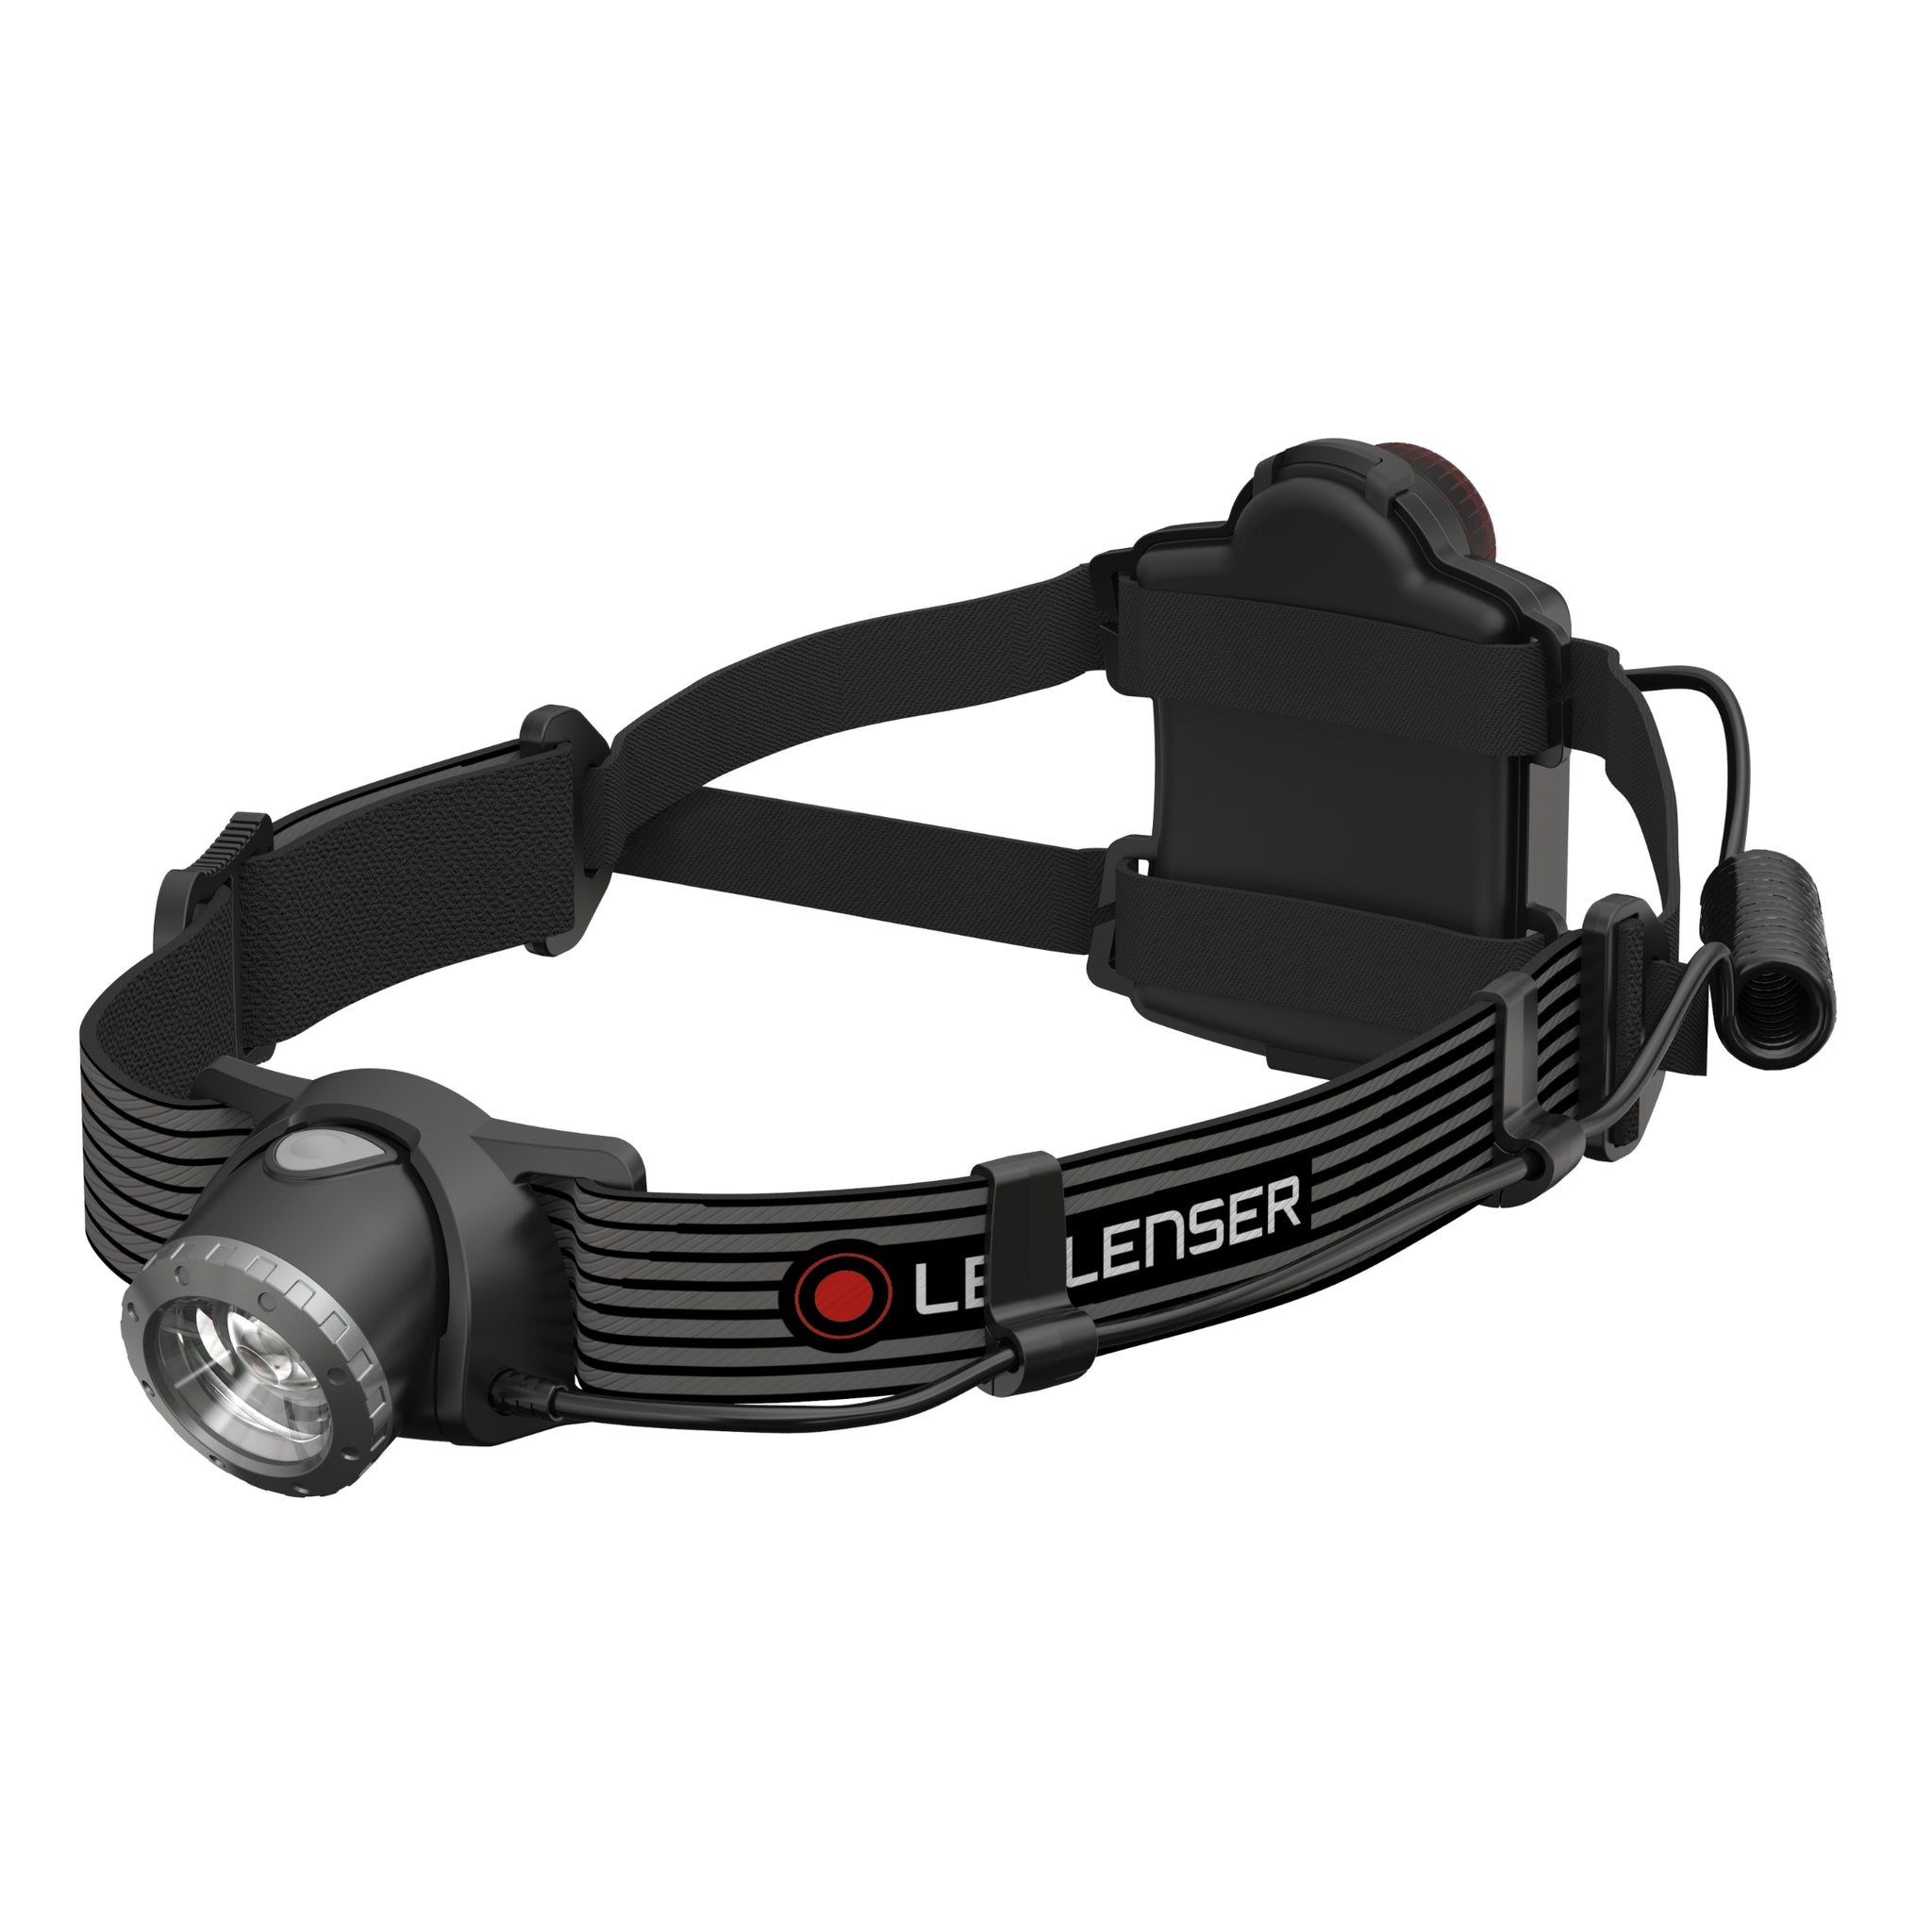 H7 SE Head Torch Special Edition